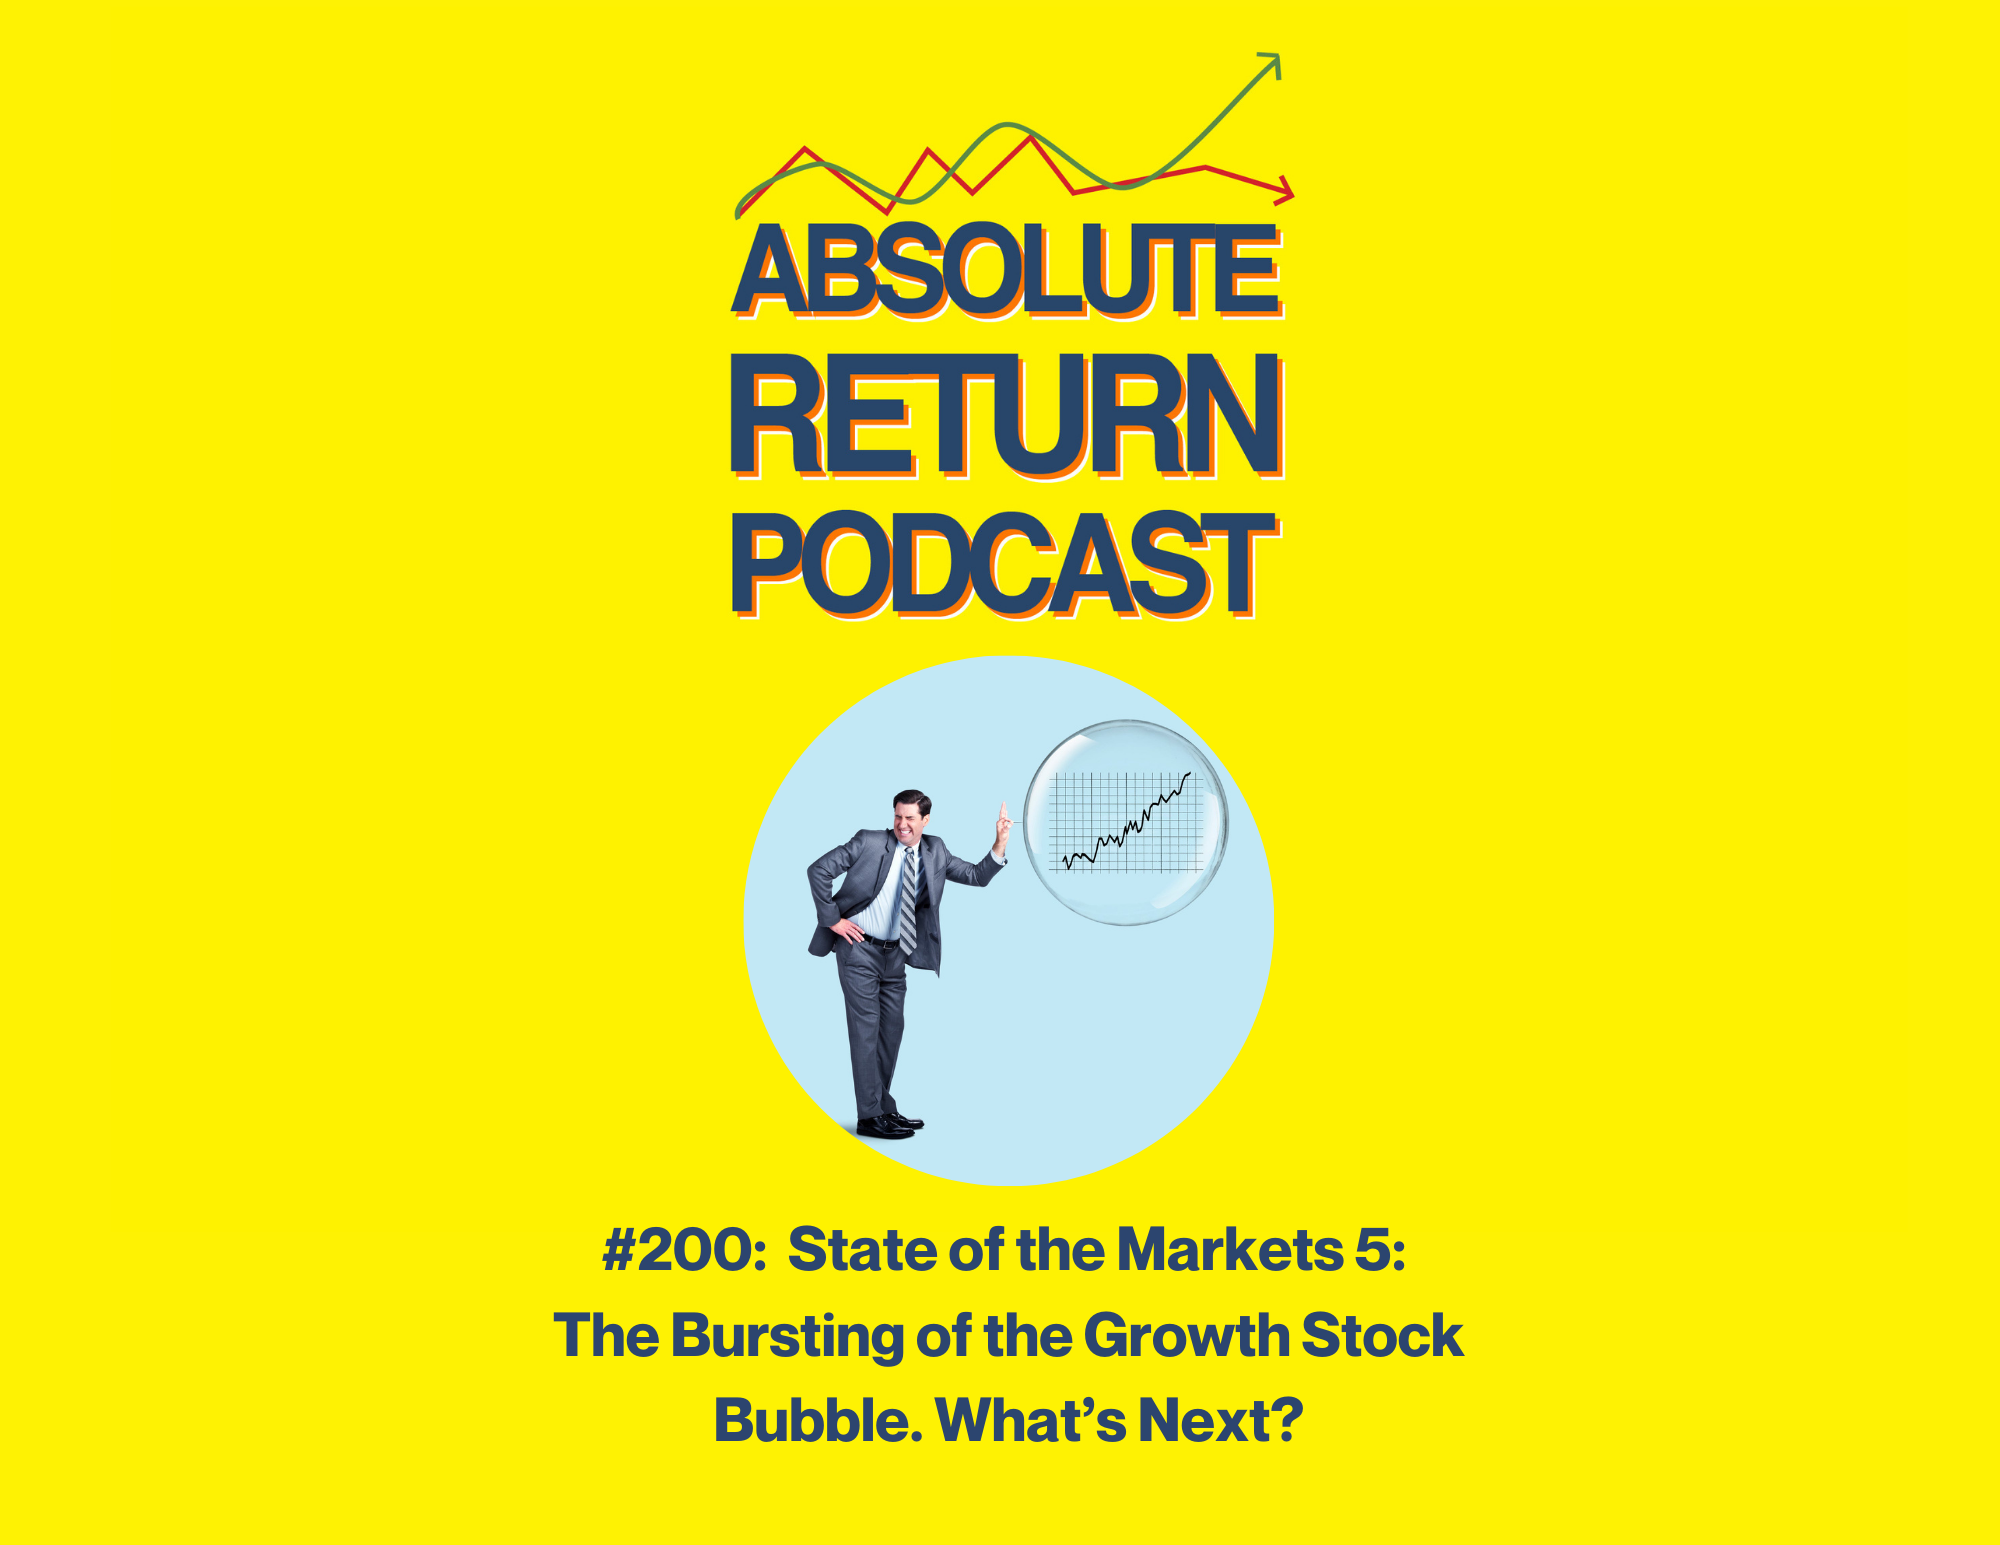 Absolute Return Podcast #200: State of the Markets 5 – The Bursting of the Growth Stock Bubble. What’s Next?